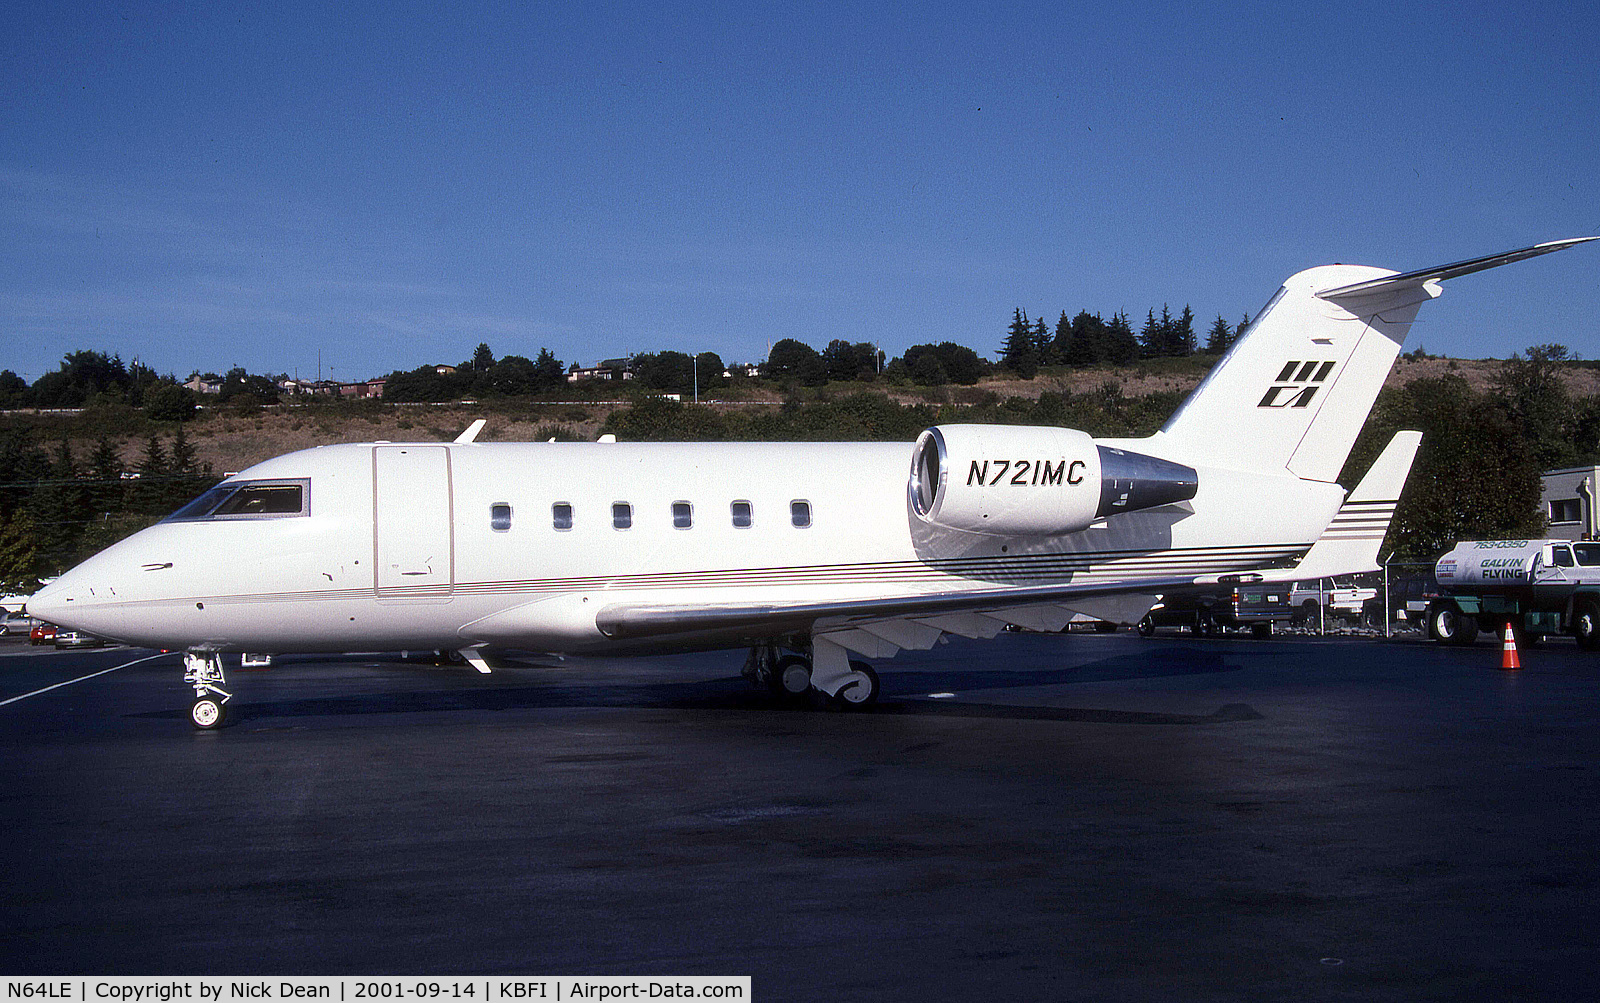 N64LE, 1988 Canadair Challenger 601-3A (CL-600-2B16) C/N 5031, KBFI (Seen here as N721MC which is currently on GIV C/N 1110 this Challenger is currently N64LE as posted)